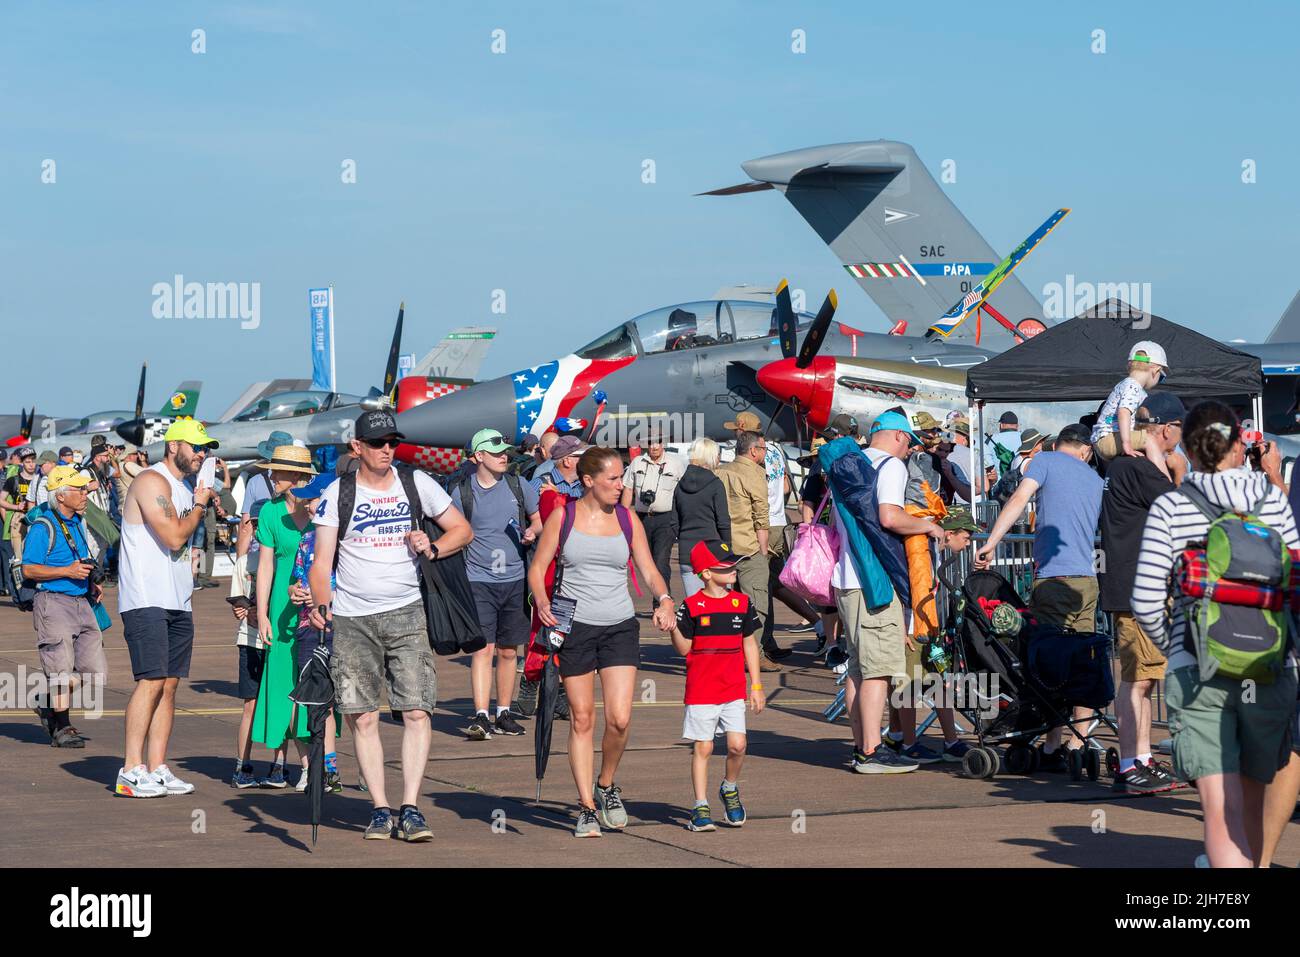 RAF Fairford, Gloucestershire, UK. 16th Jul, 2022. One of the world’s largest airshows has returned after a 3 year break due to the covid pandemic bringing international air forces, display teams and huge crowds to the Cotswolds. Families around the military planes on display Stock Photo